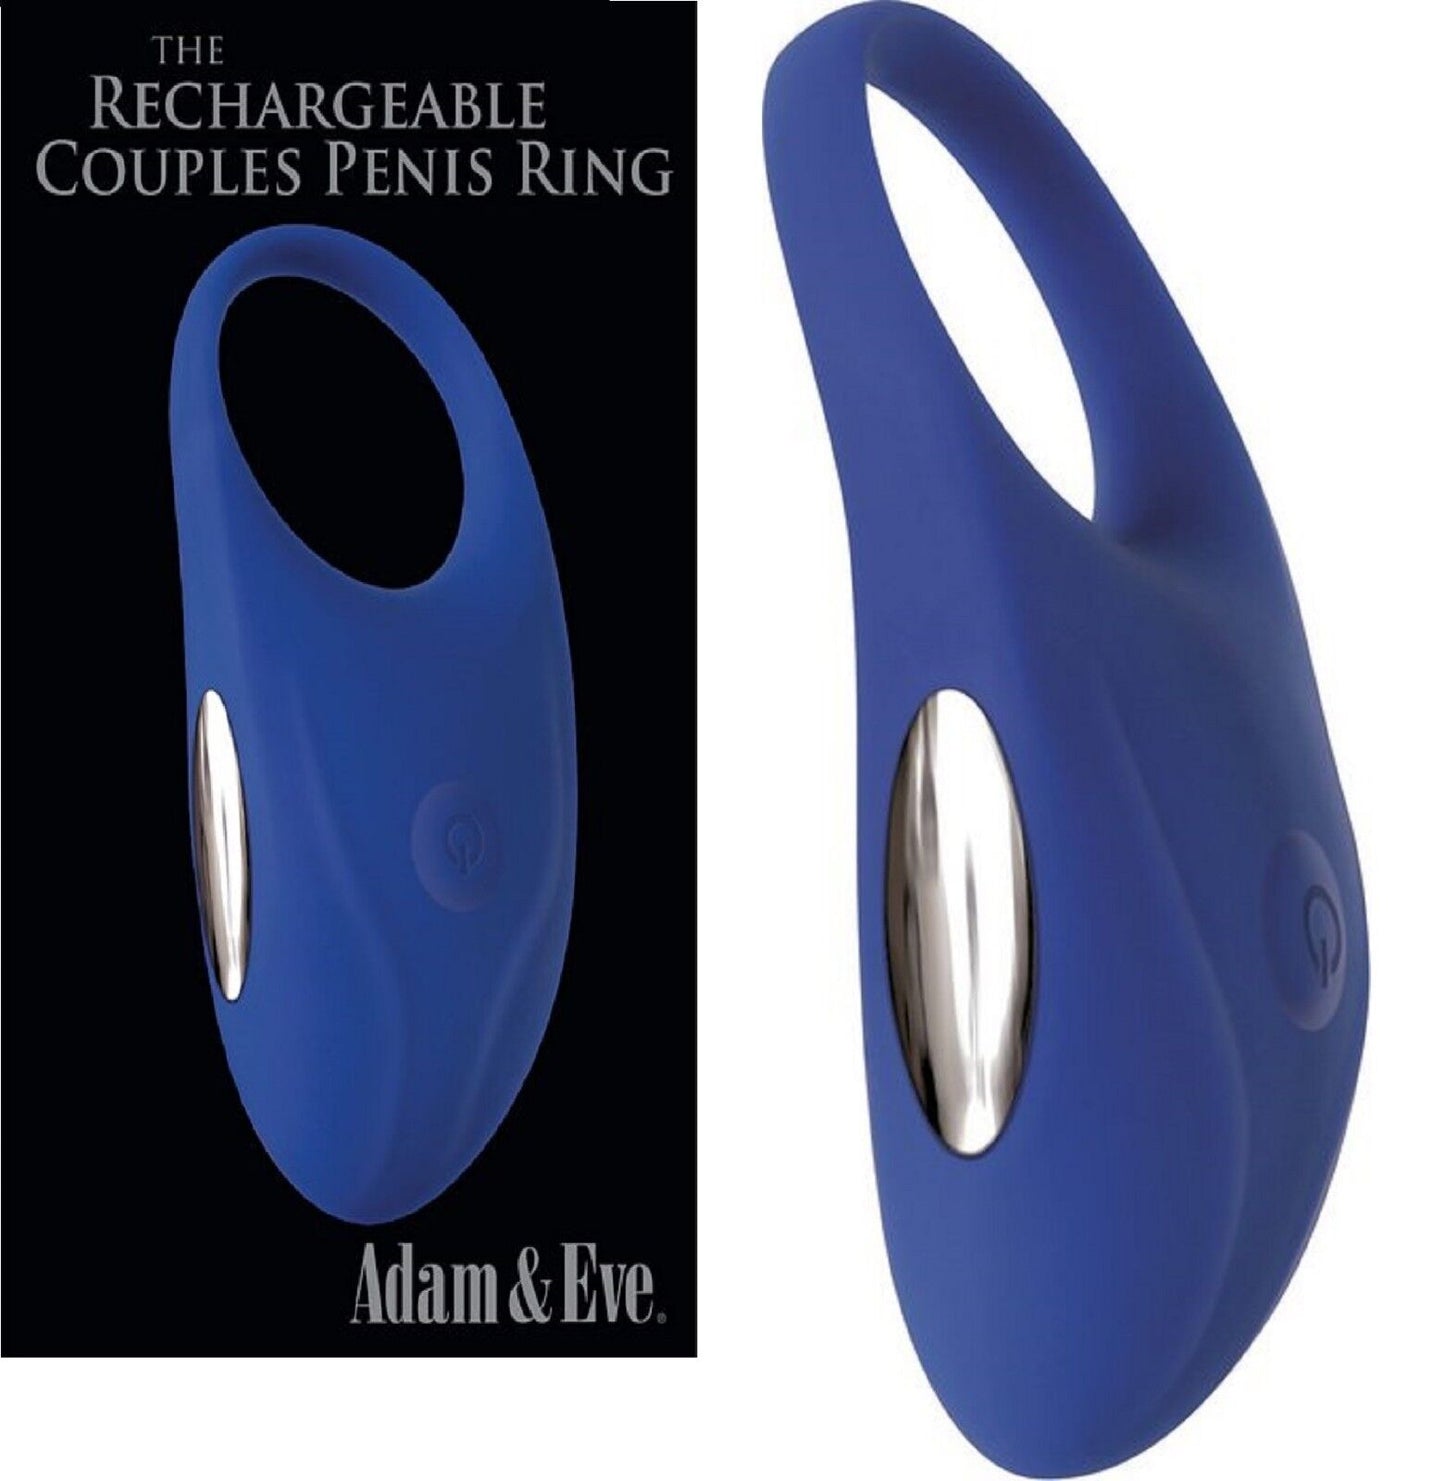 A&E Rechargeable Couples Penis Ring